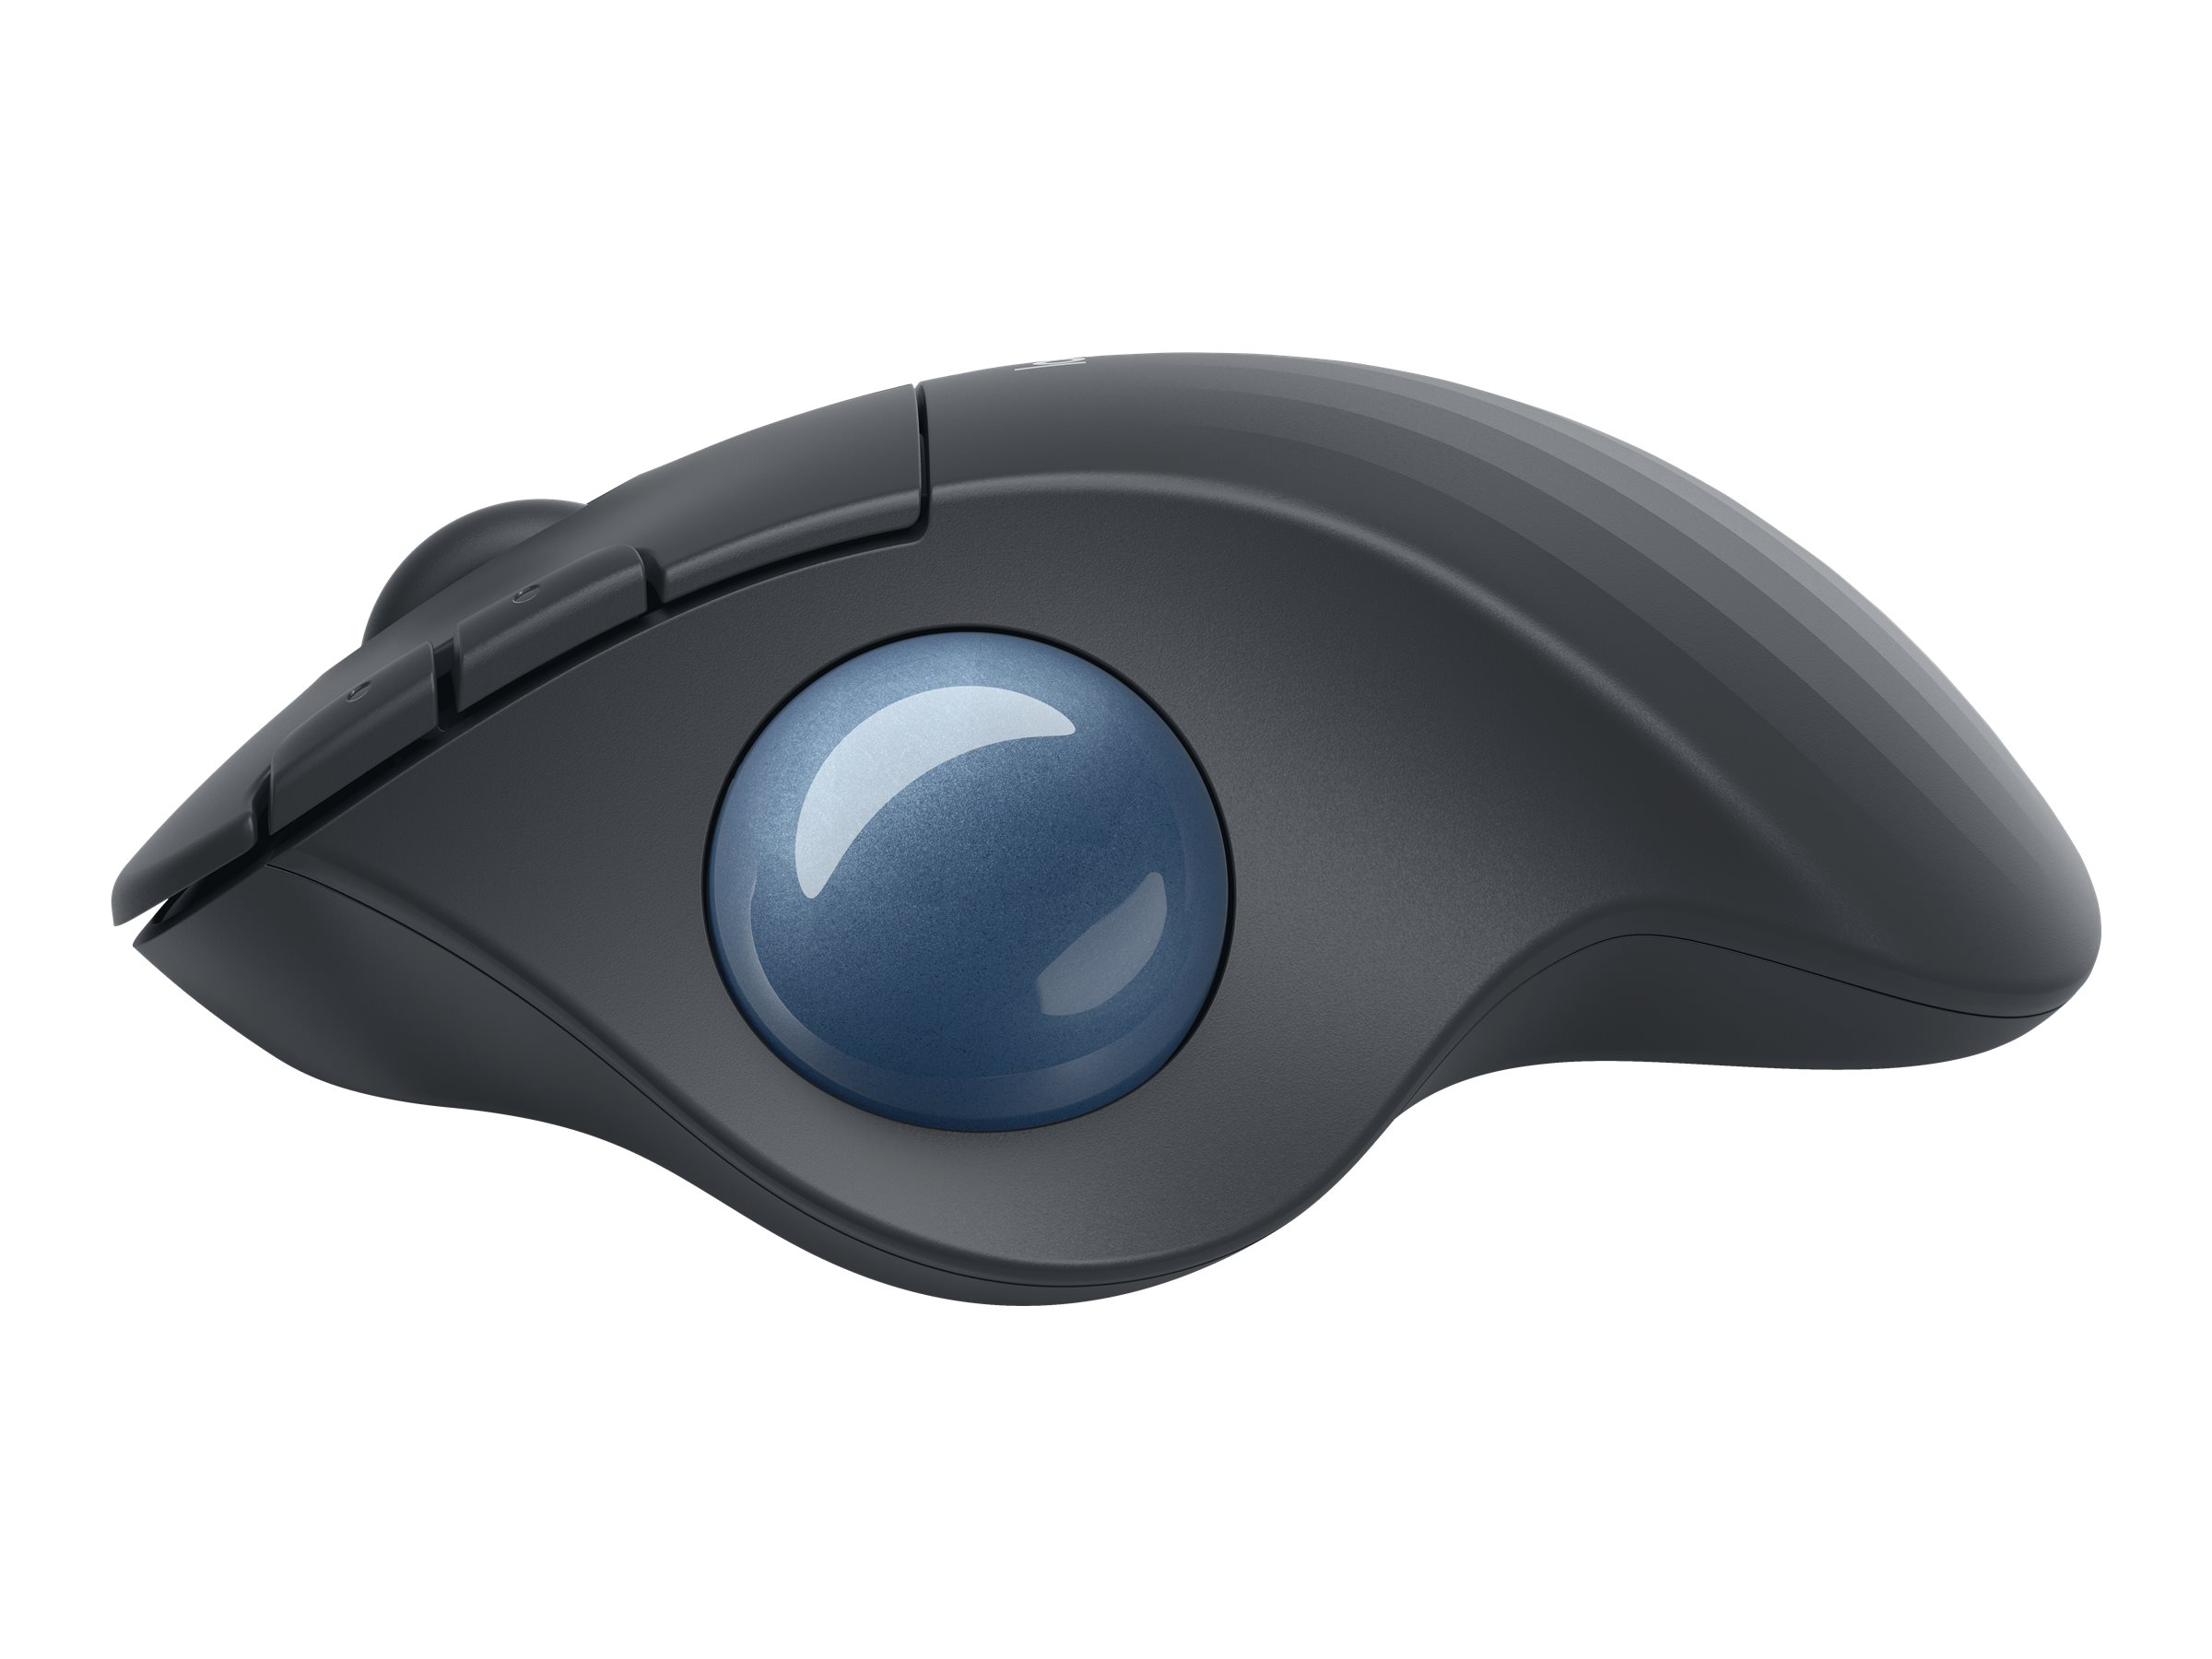 Logitech Ergo M575 Review: This Is a Very Good Trackball